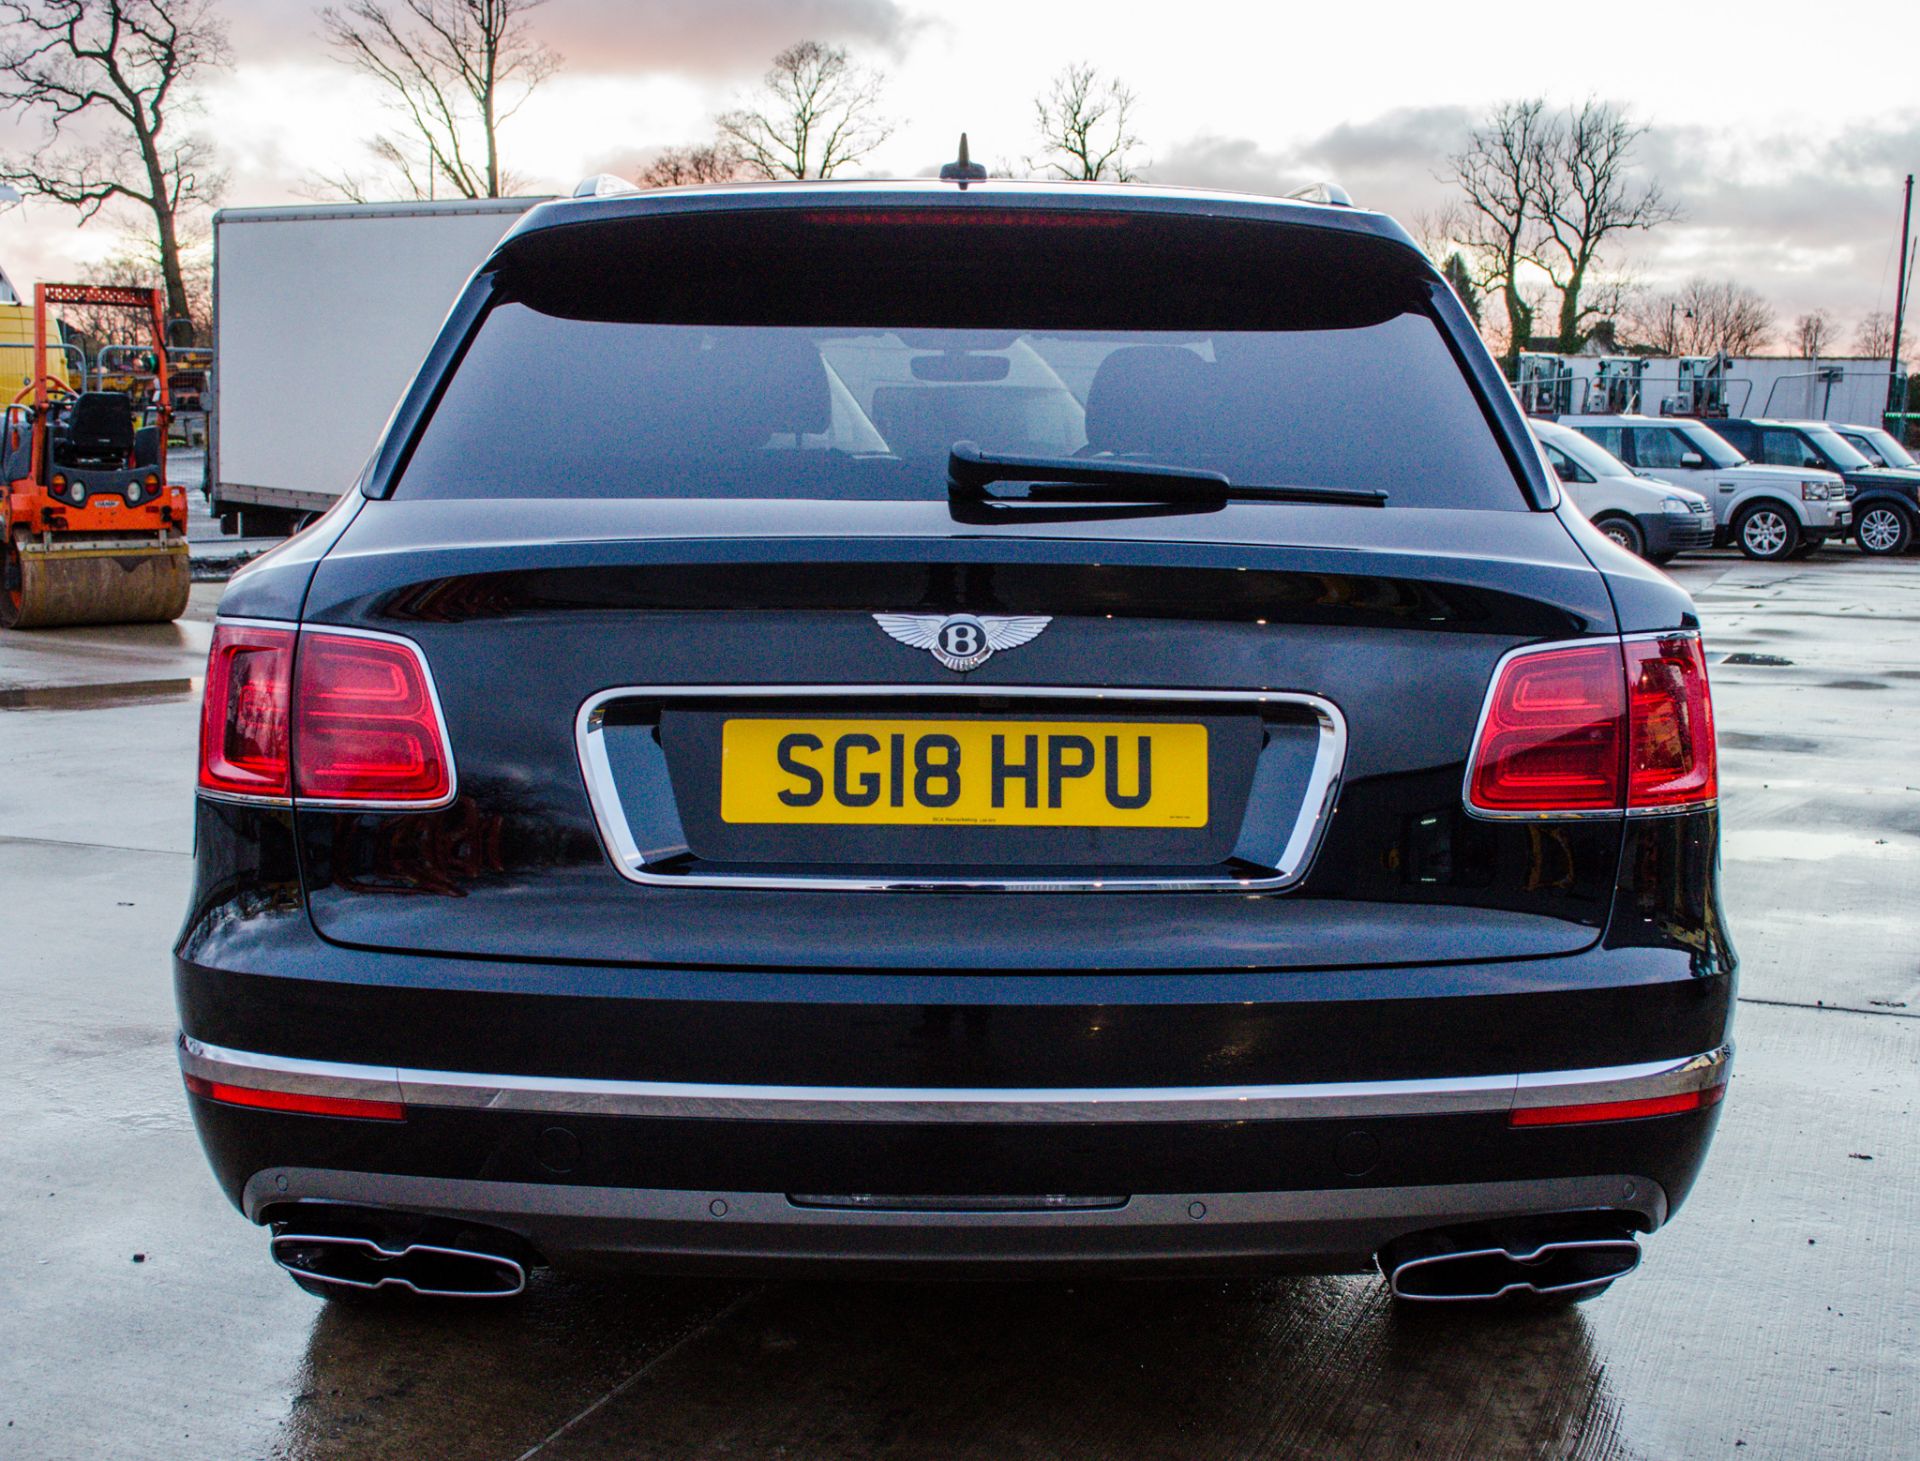 Bentley Bentayga 4.0 V8 diesel 4wd 7 seat SUV Reg No: SG 18 HPU Recorded Mileage: 37,650 Date of - Image 10 of 41